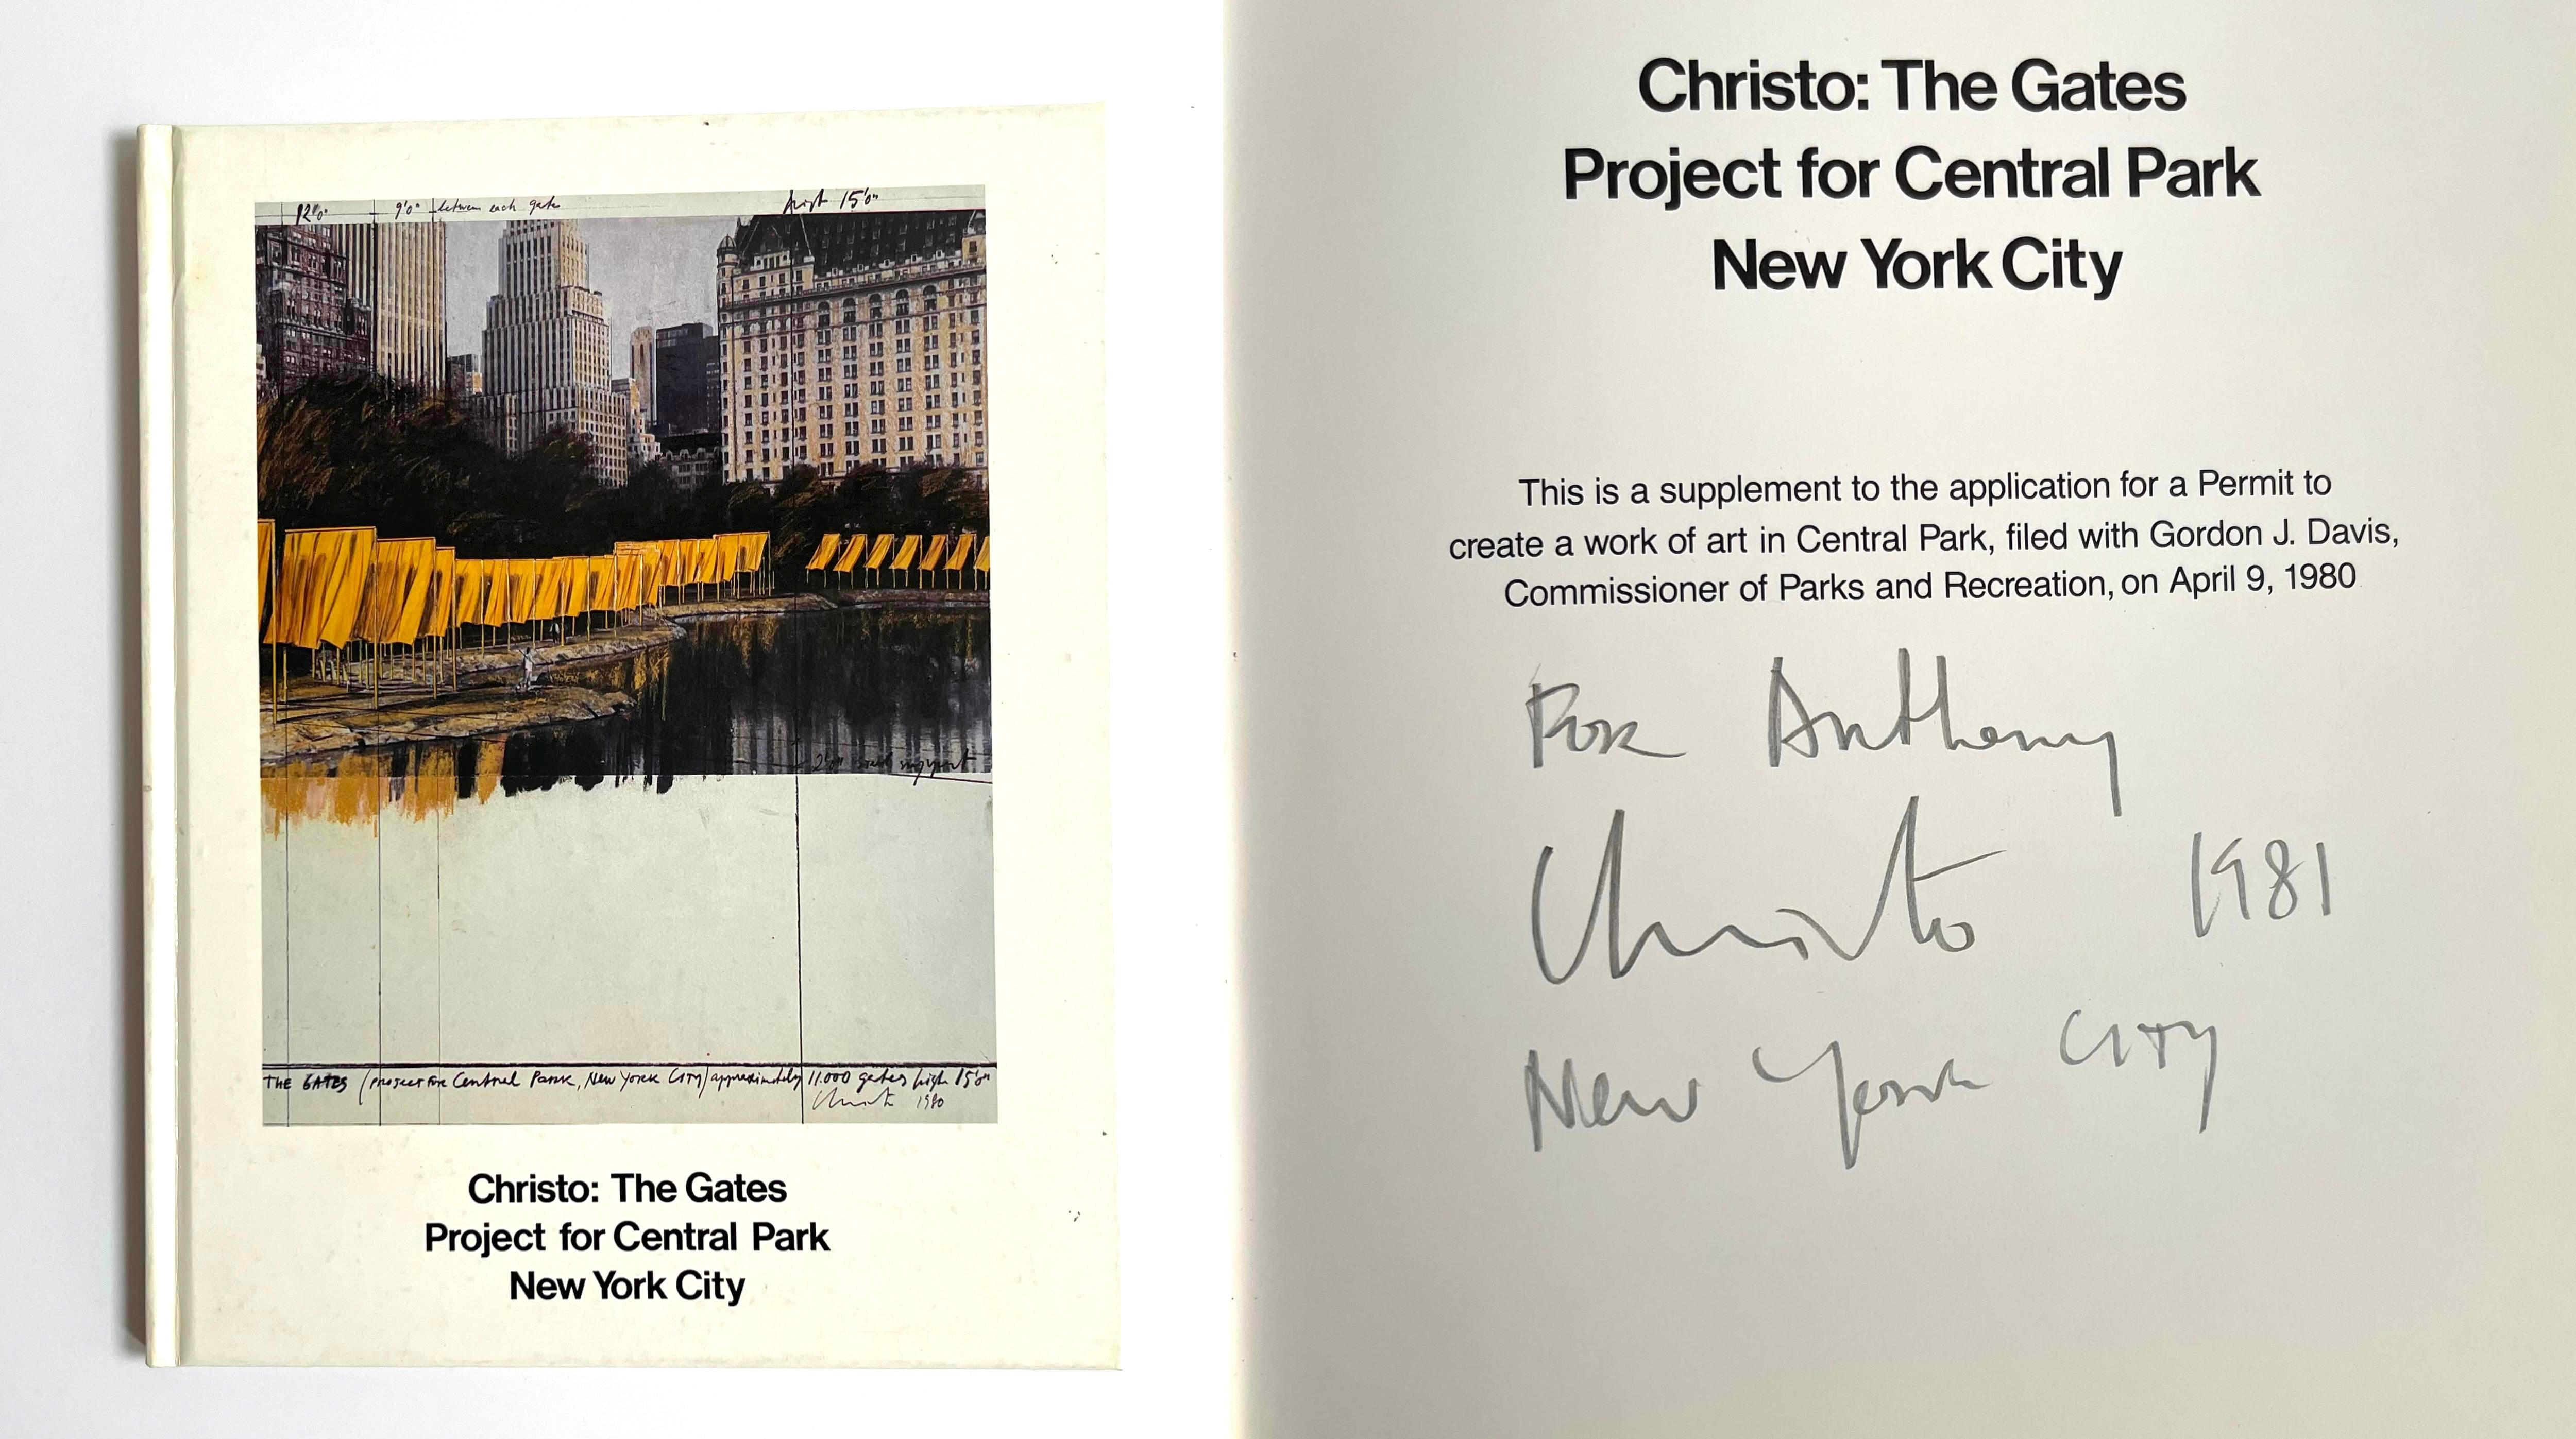 Super rare original signed The Gates  proposal book for famous art critic:
Christo: The Gates Project for Central Park New York City (Hand Signed and Inscribed to art critic Anthony Haden-Guest), 1981
Hardback monograph with no dust jacket exactly